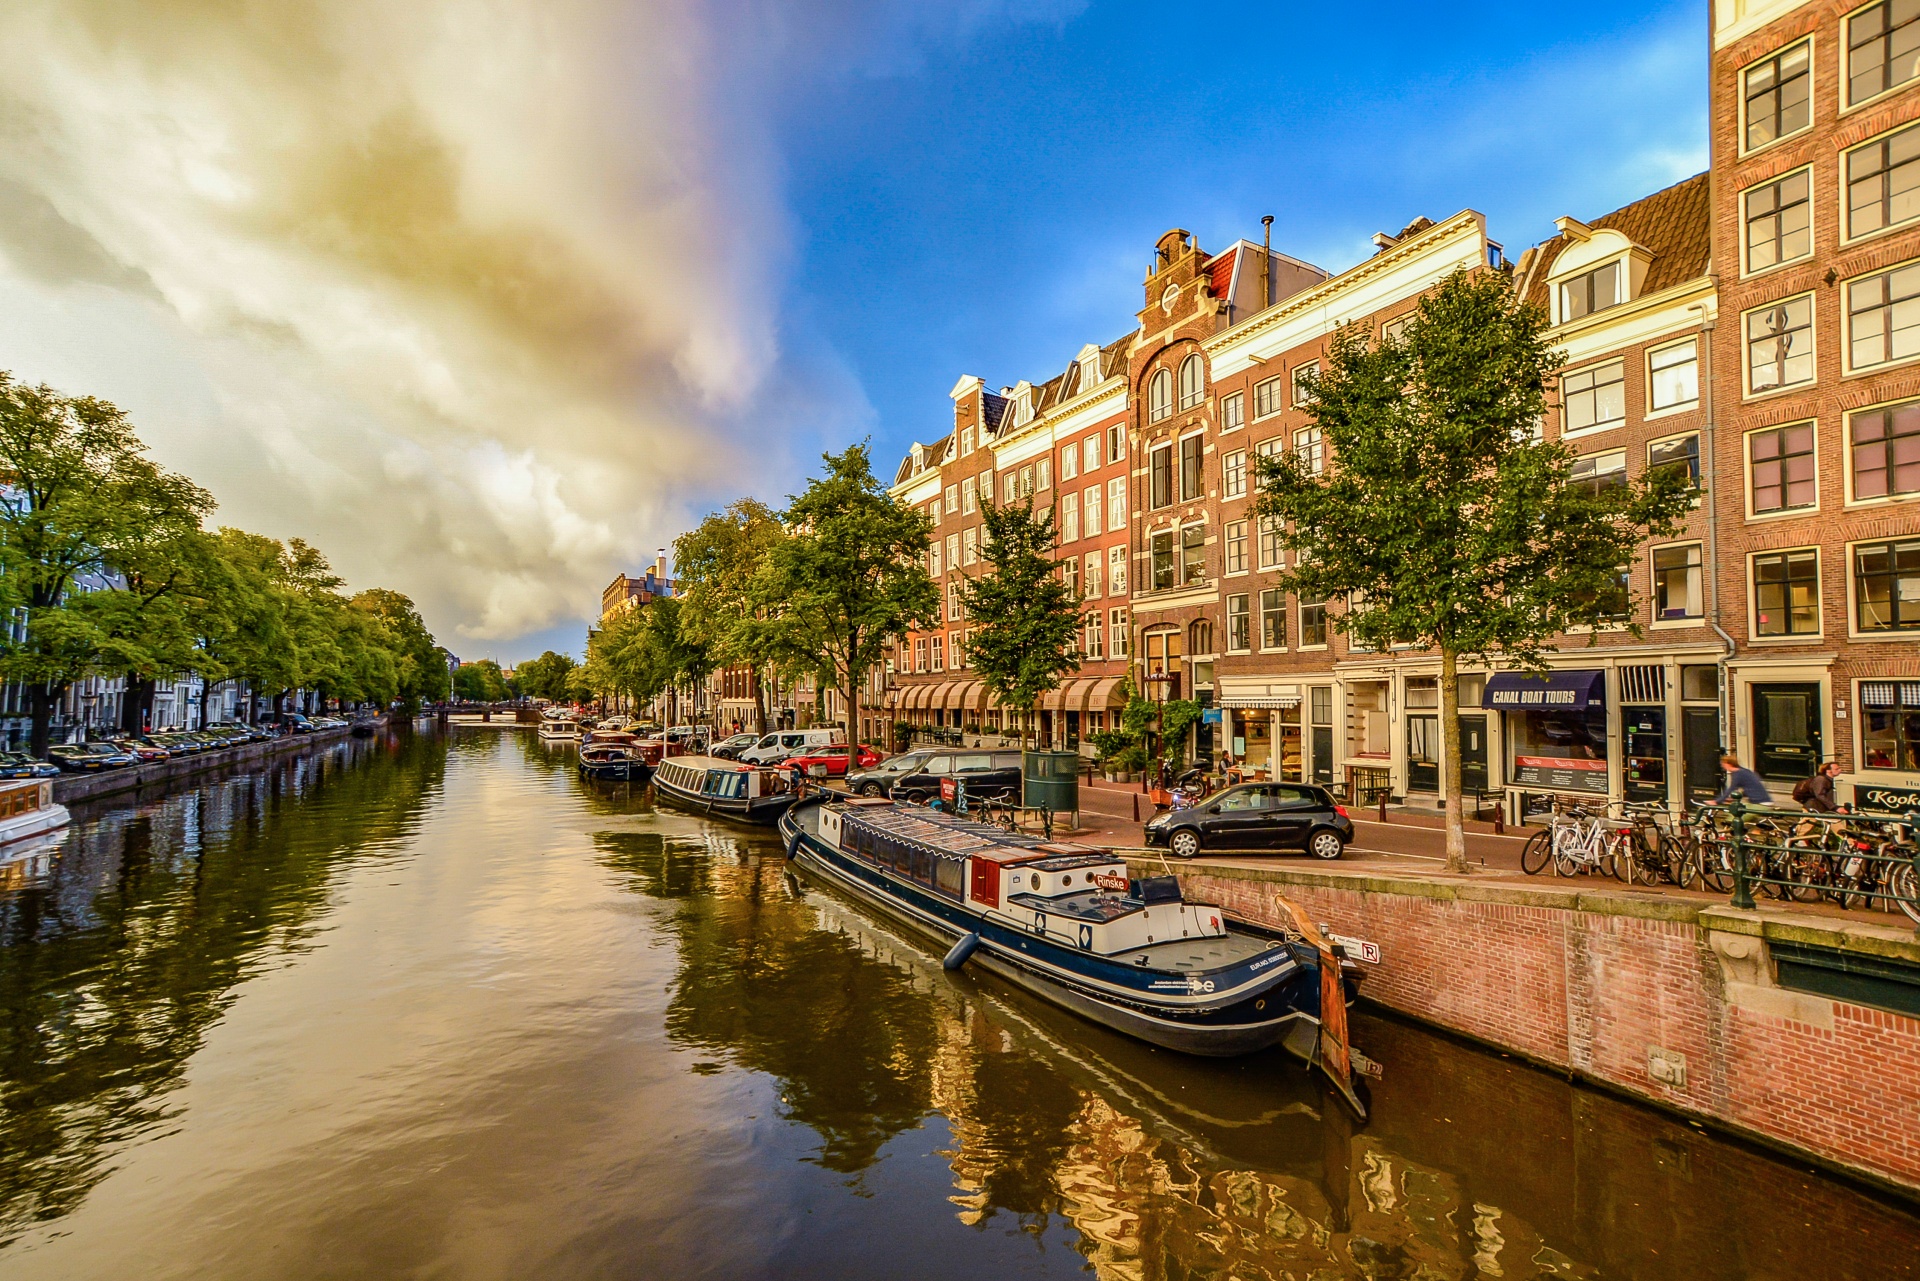 storm-approaching-in-amsterdam